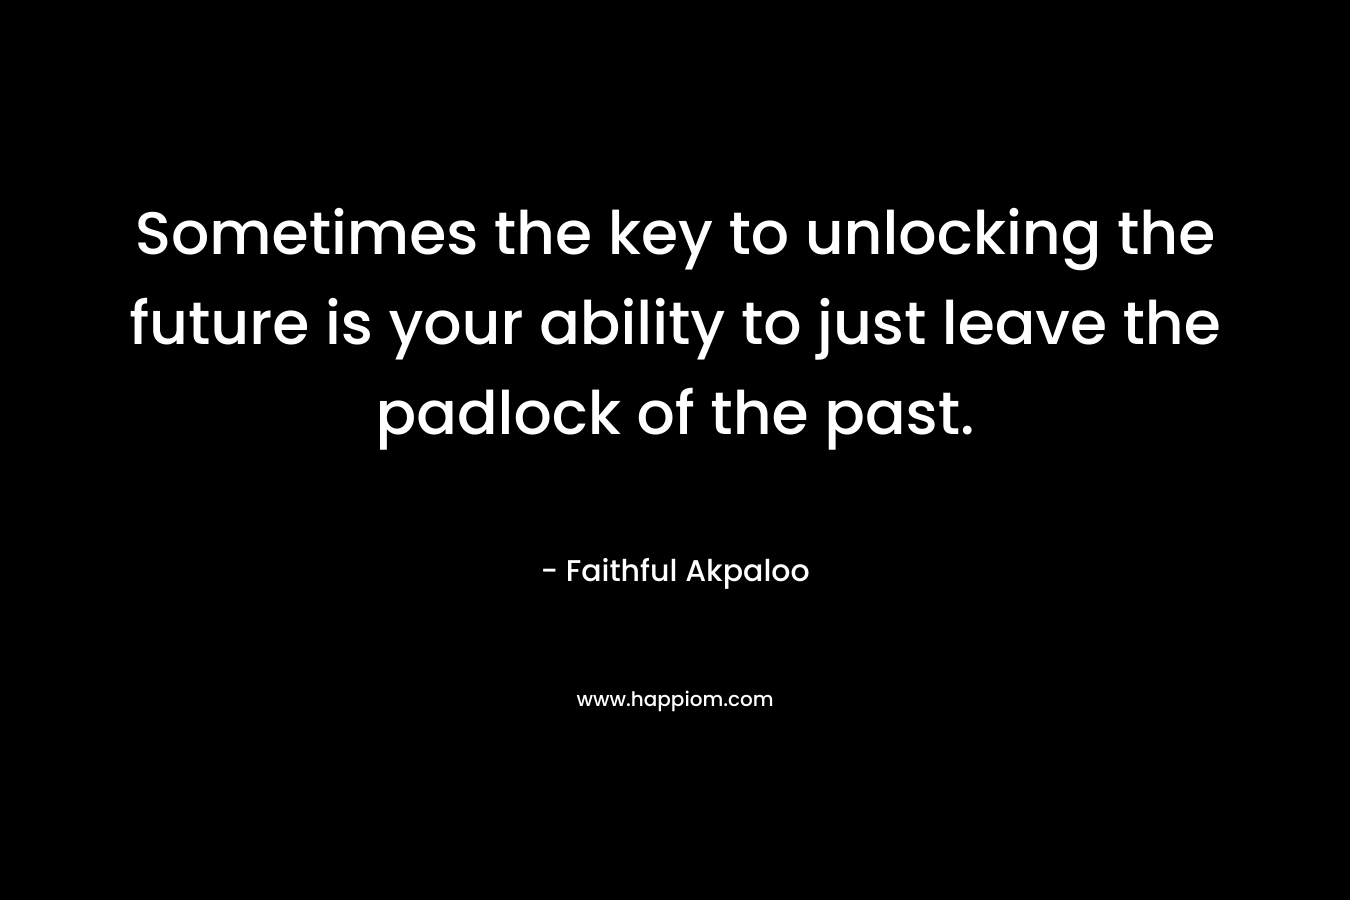 Sometimes the key to unlocking the future is your ability to just leave the padlock of the past. – Faithful Akpaloo